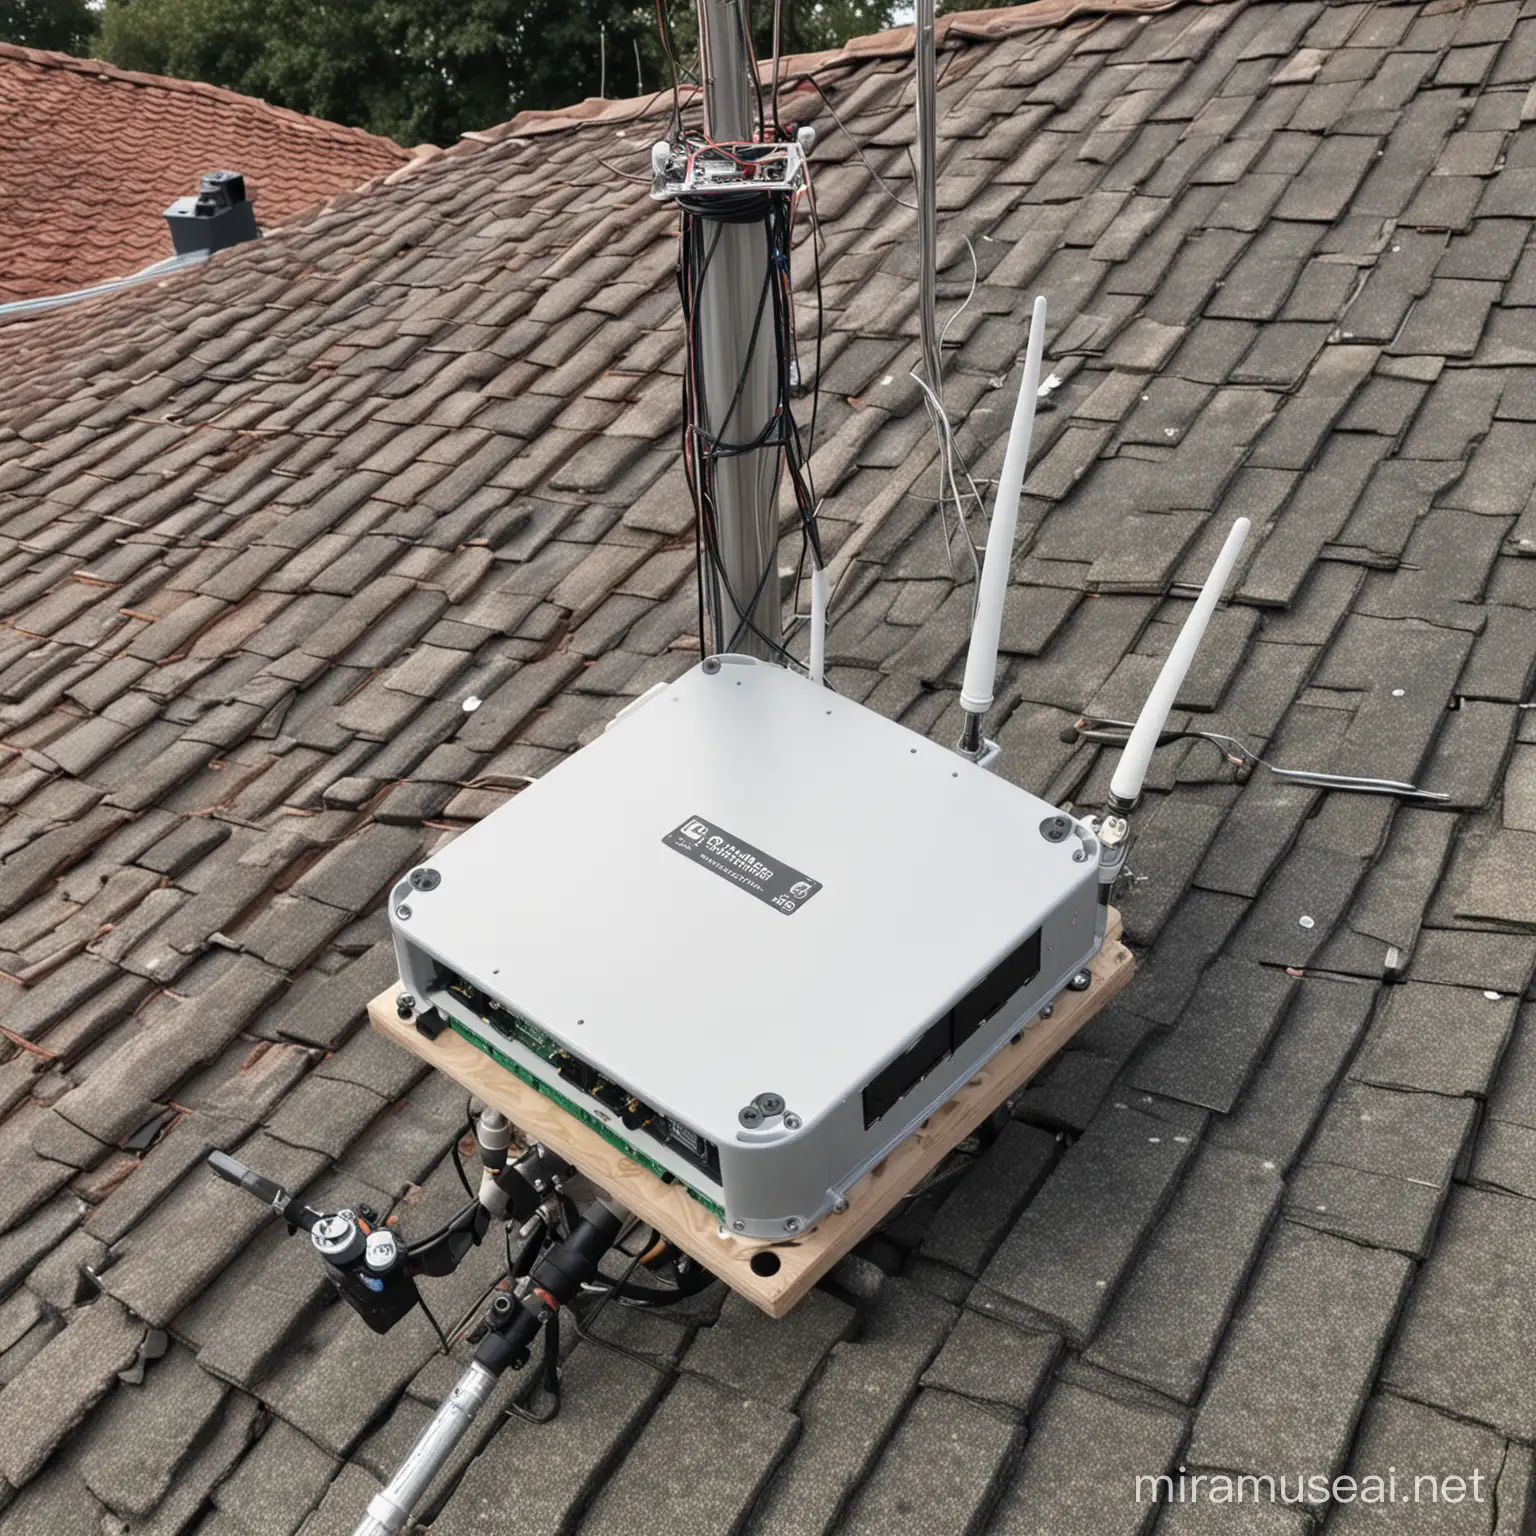 create a picture for me for an advert showcasing my 2.4ghz omni wifi antenna connected to a routerboard R433 board within an enclosure and fixed to a pole on top a roof